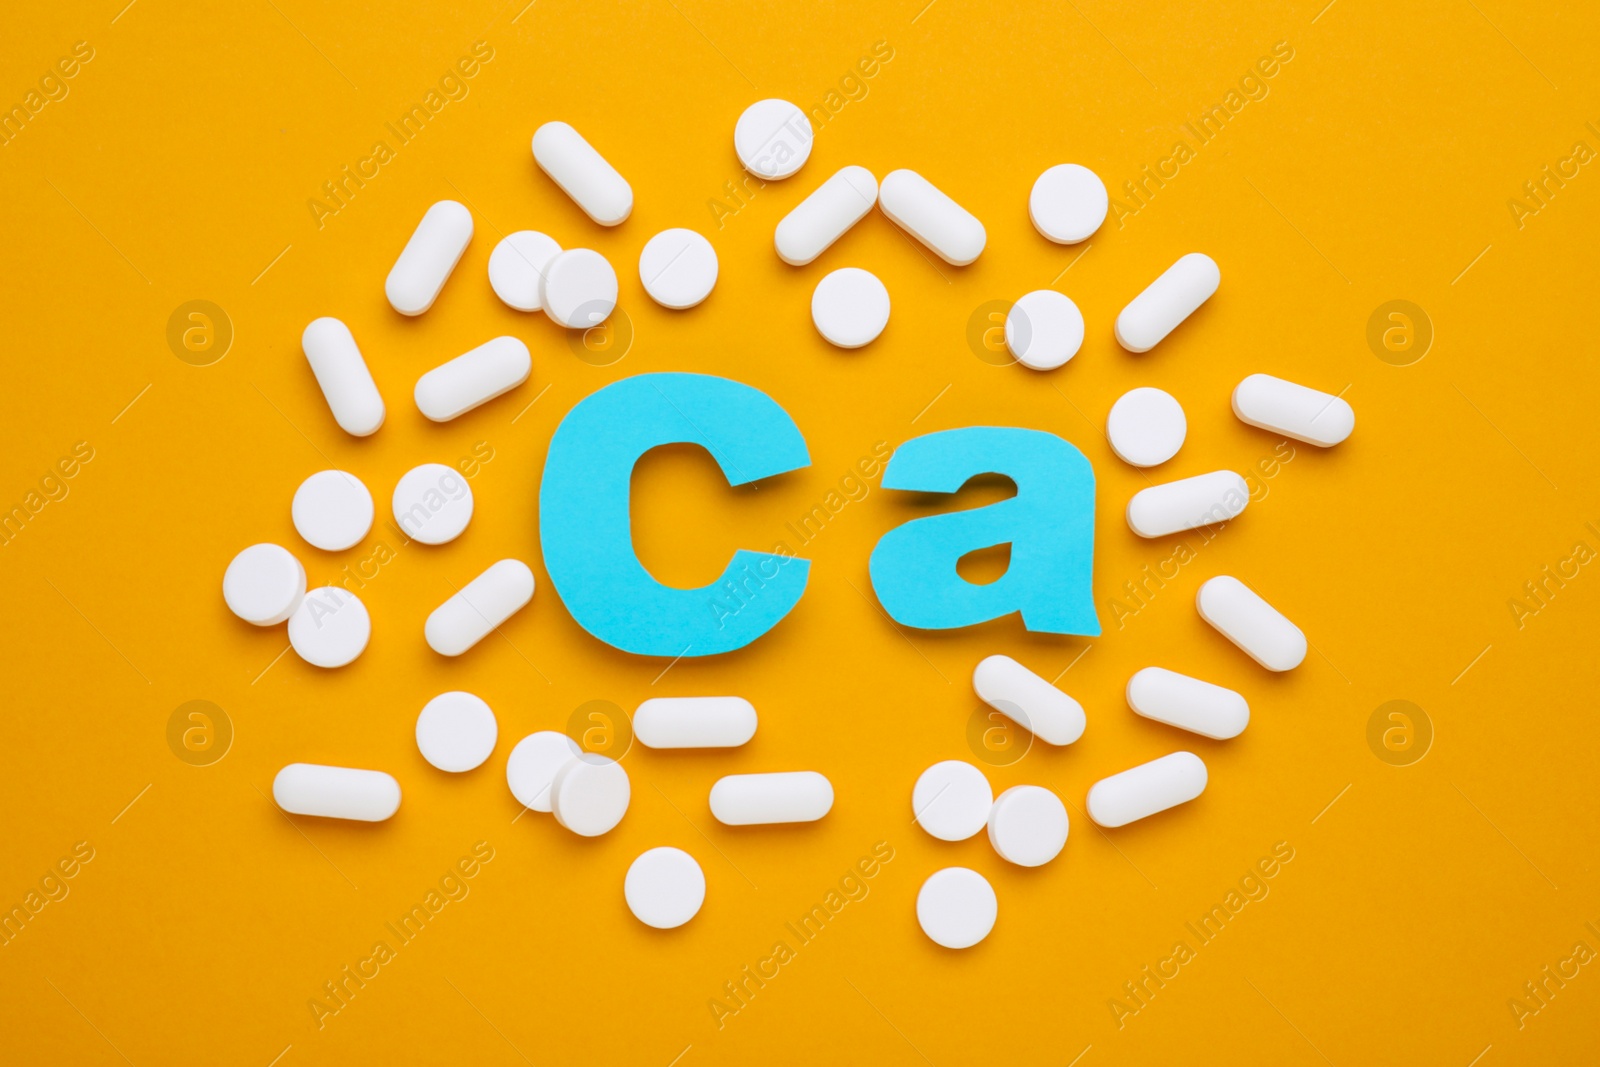 Photo of Pills and calcium symbol made of light blue letters on orange background, flat lay